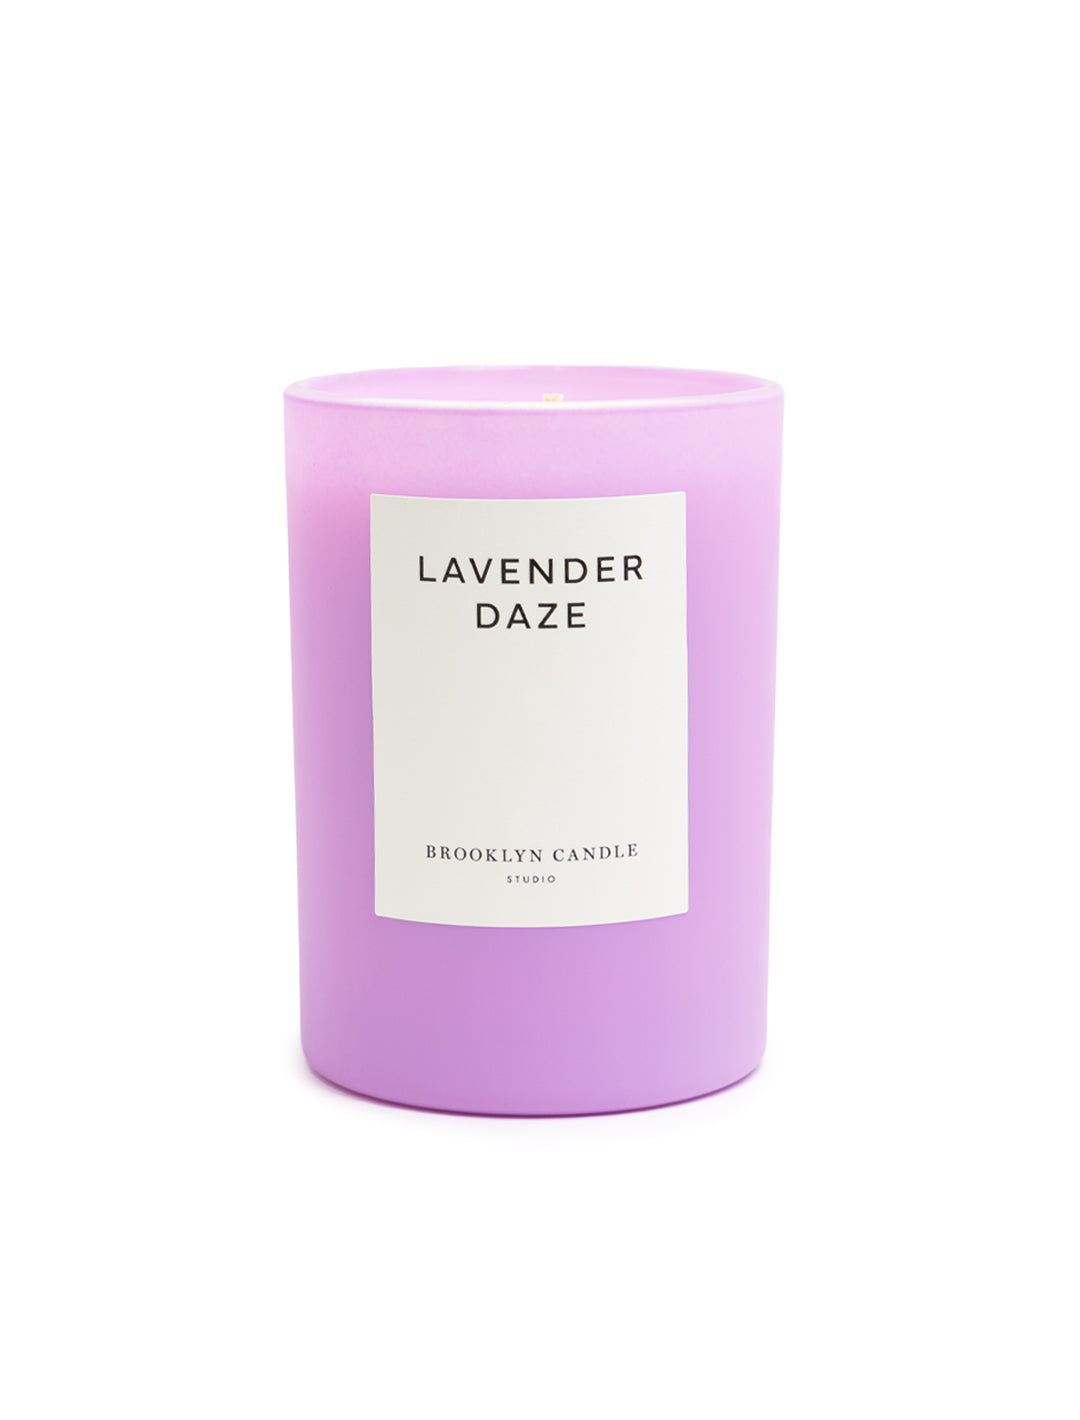 Front view of Brooklyn Candle Studio's lavender daze candle.